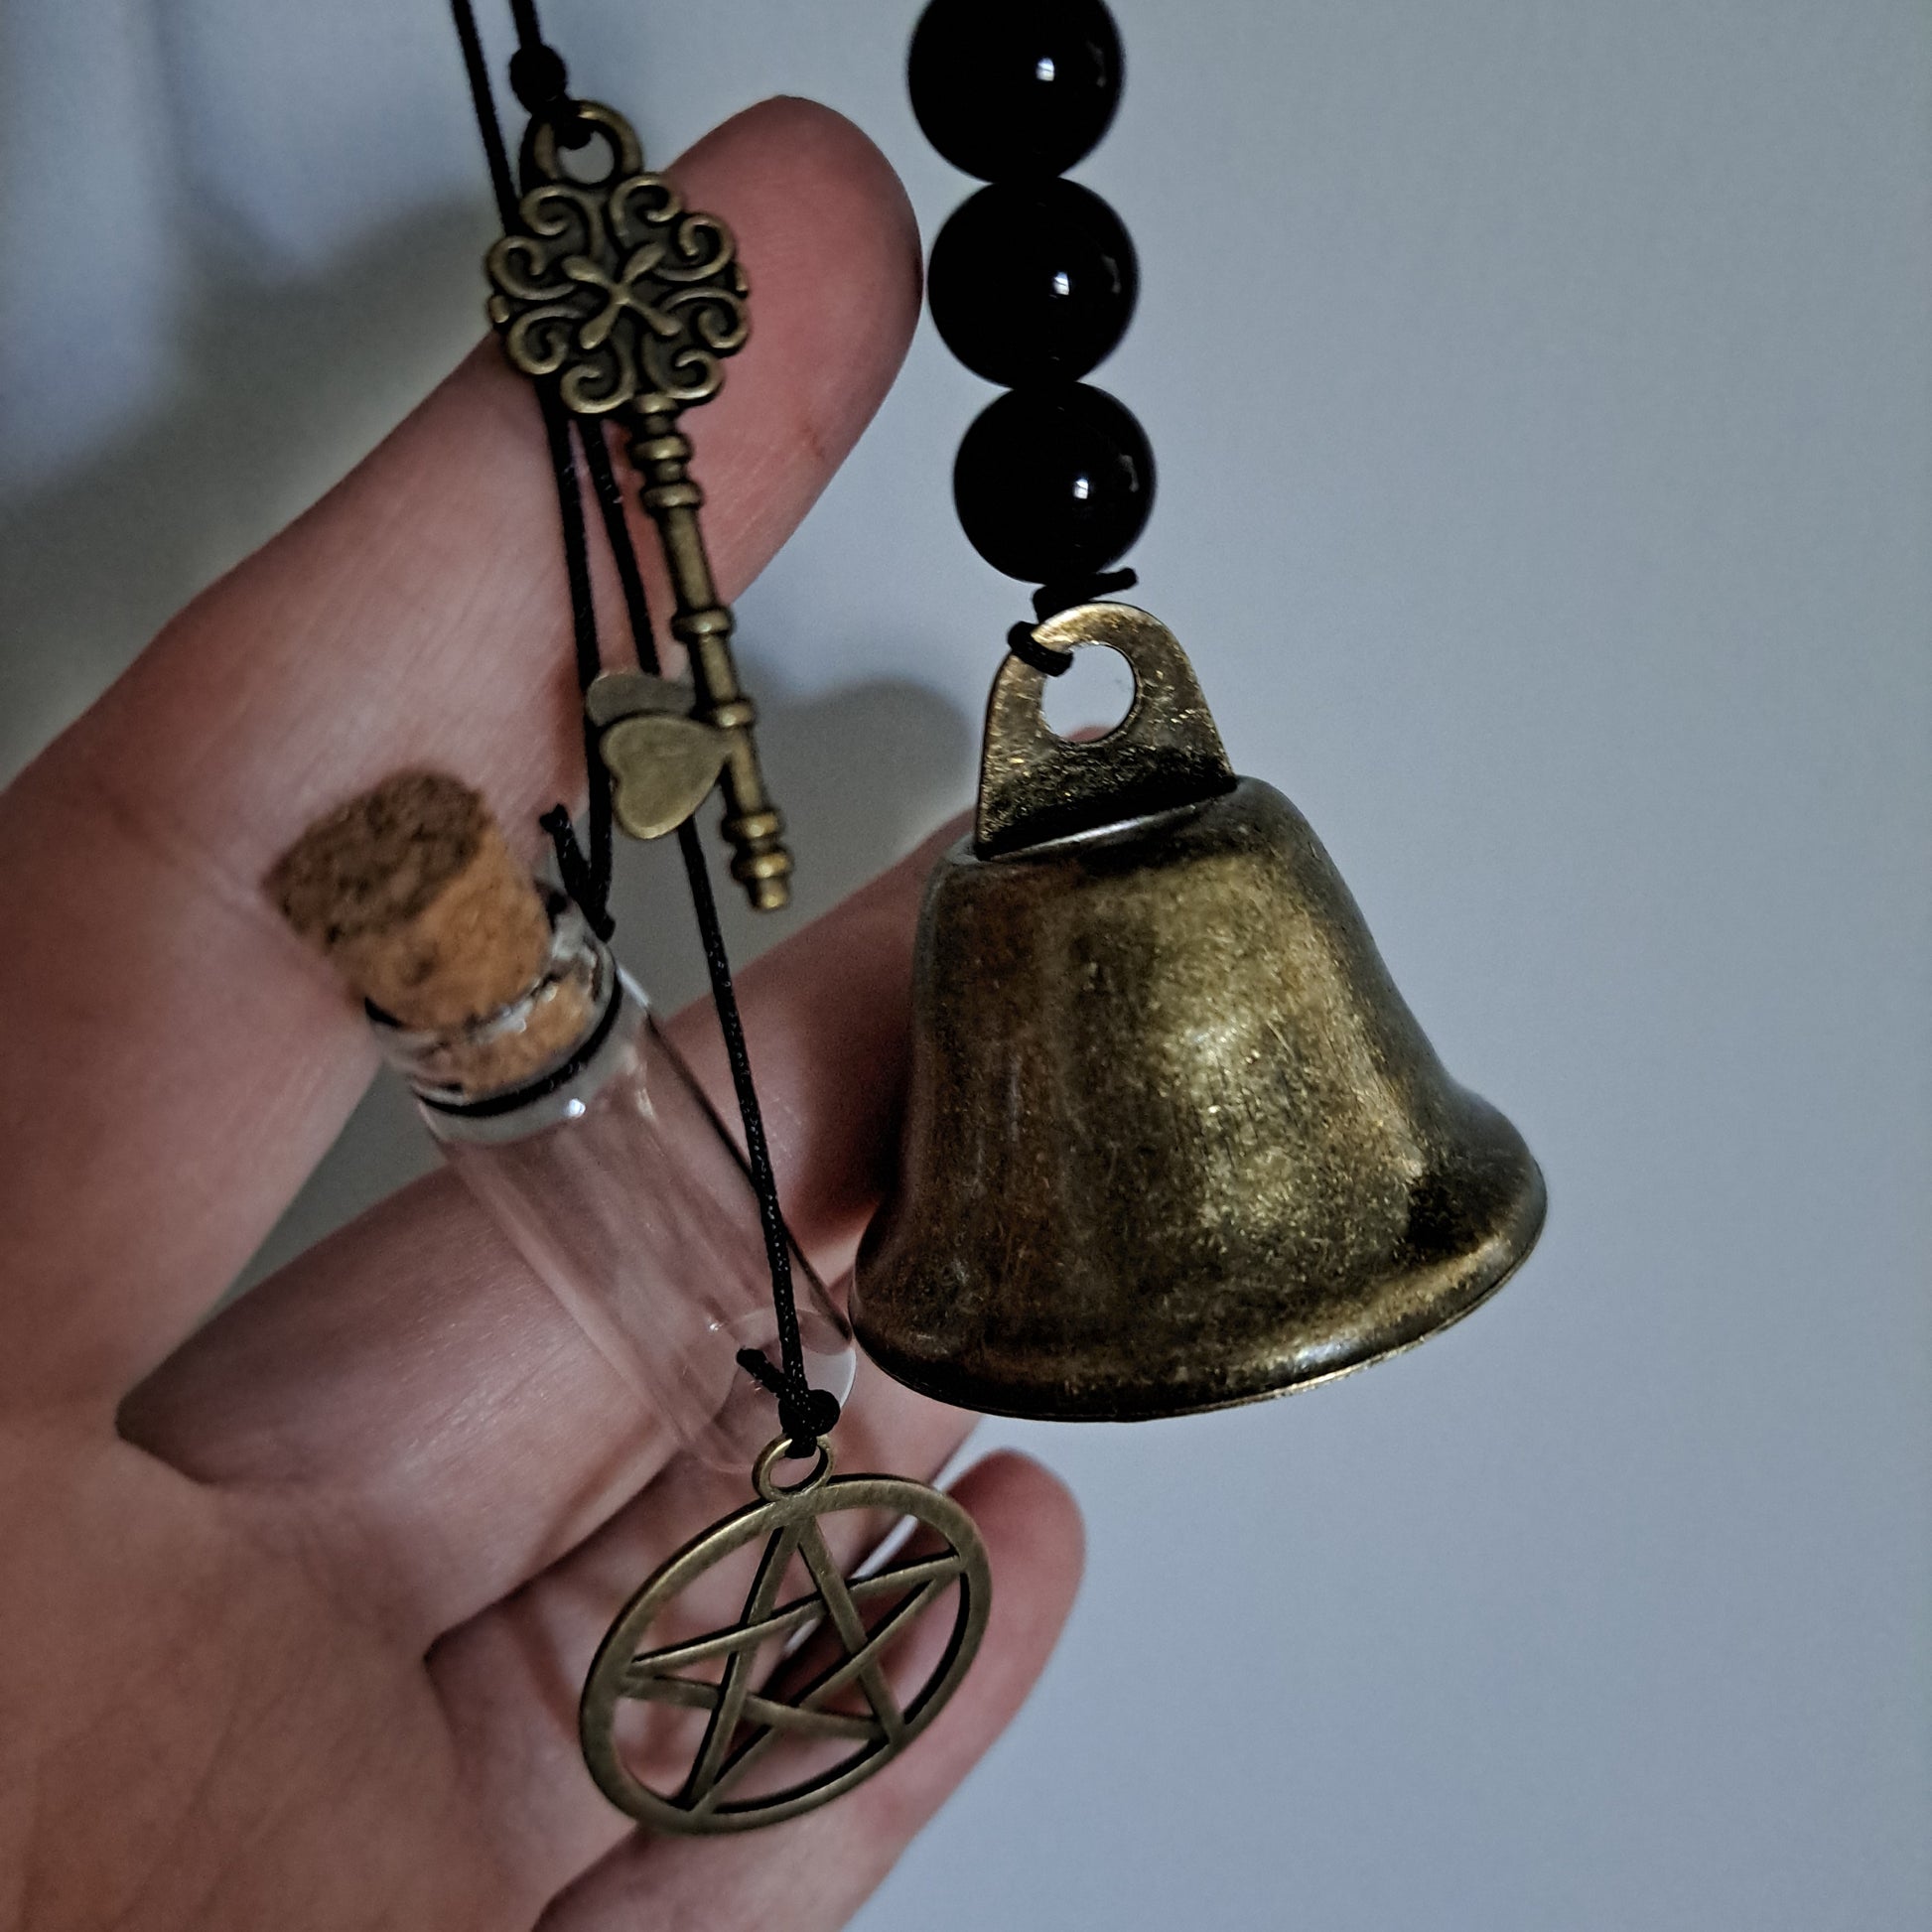 Witches Bells, Witches Gift, Witches Bell, Protection, Wicca Deco